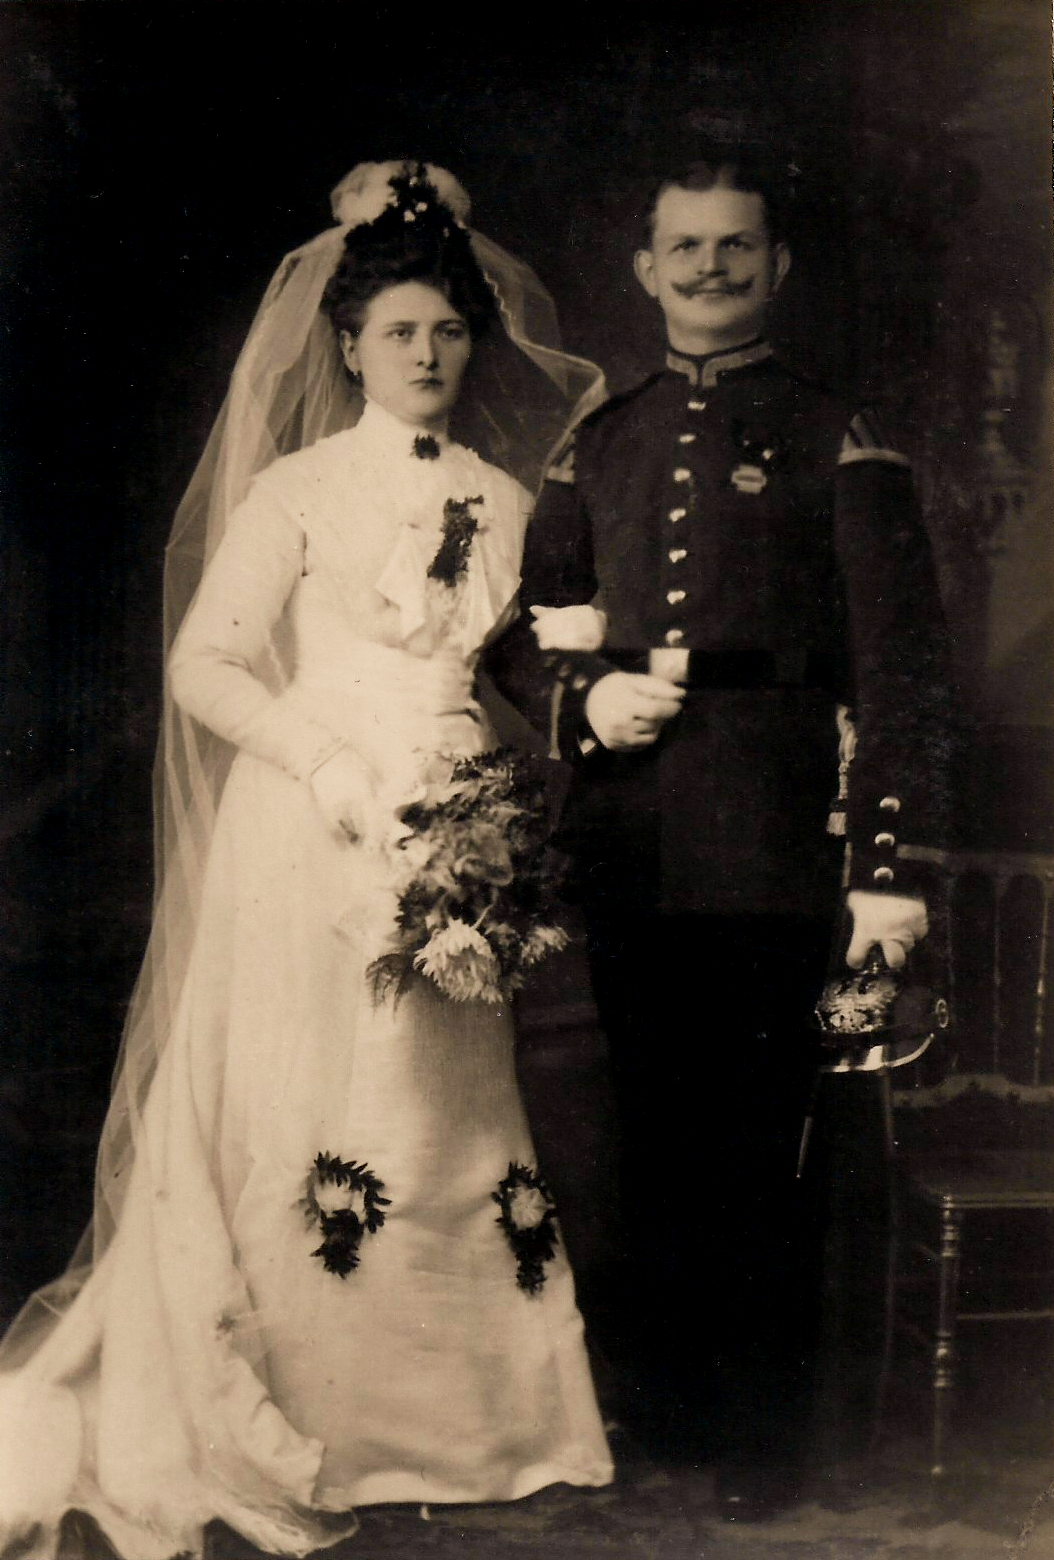 Marriage of Richard Just (born on July 18, 1879 in Großwartenberg Silesia)
     and Mathilde Fröhlich (born on November 13, 1882)